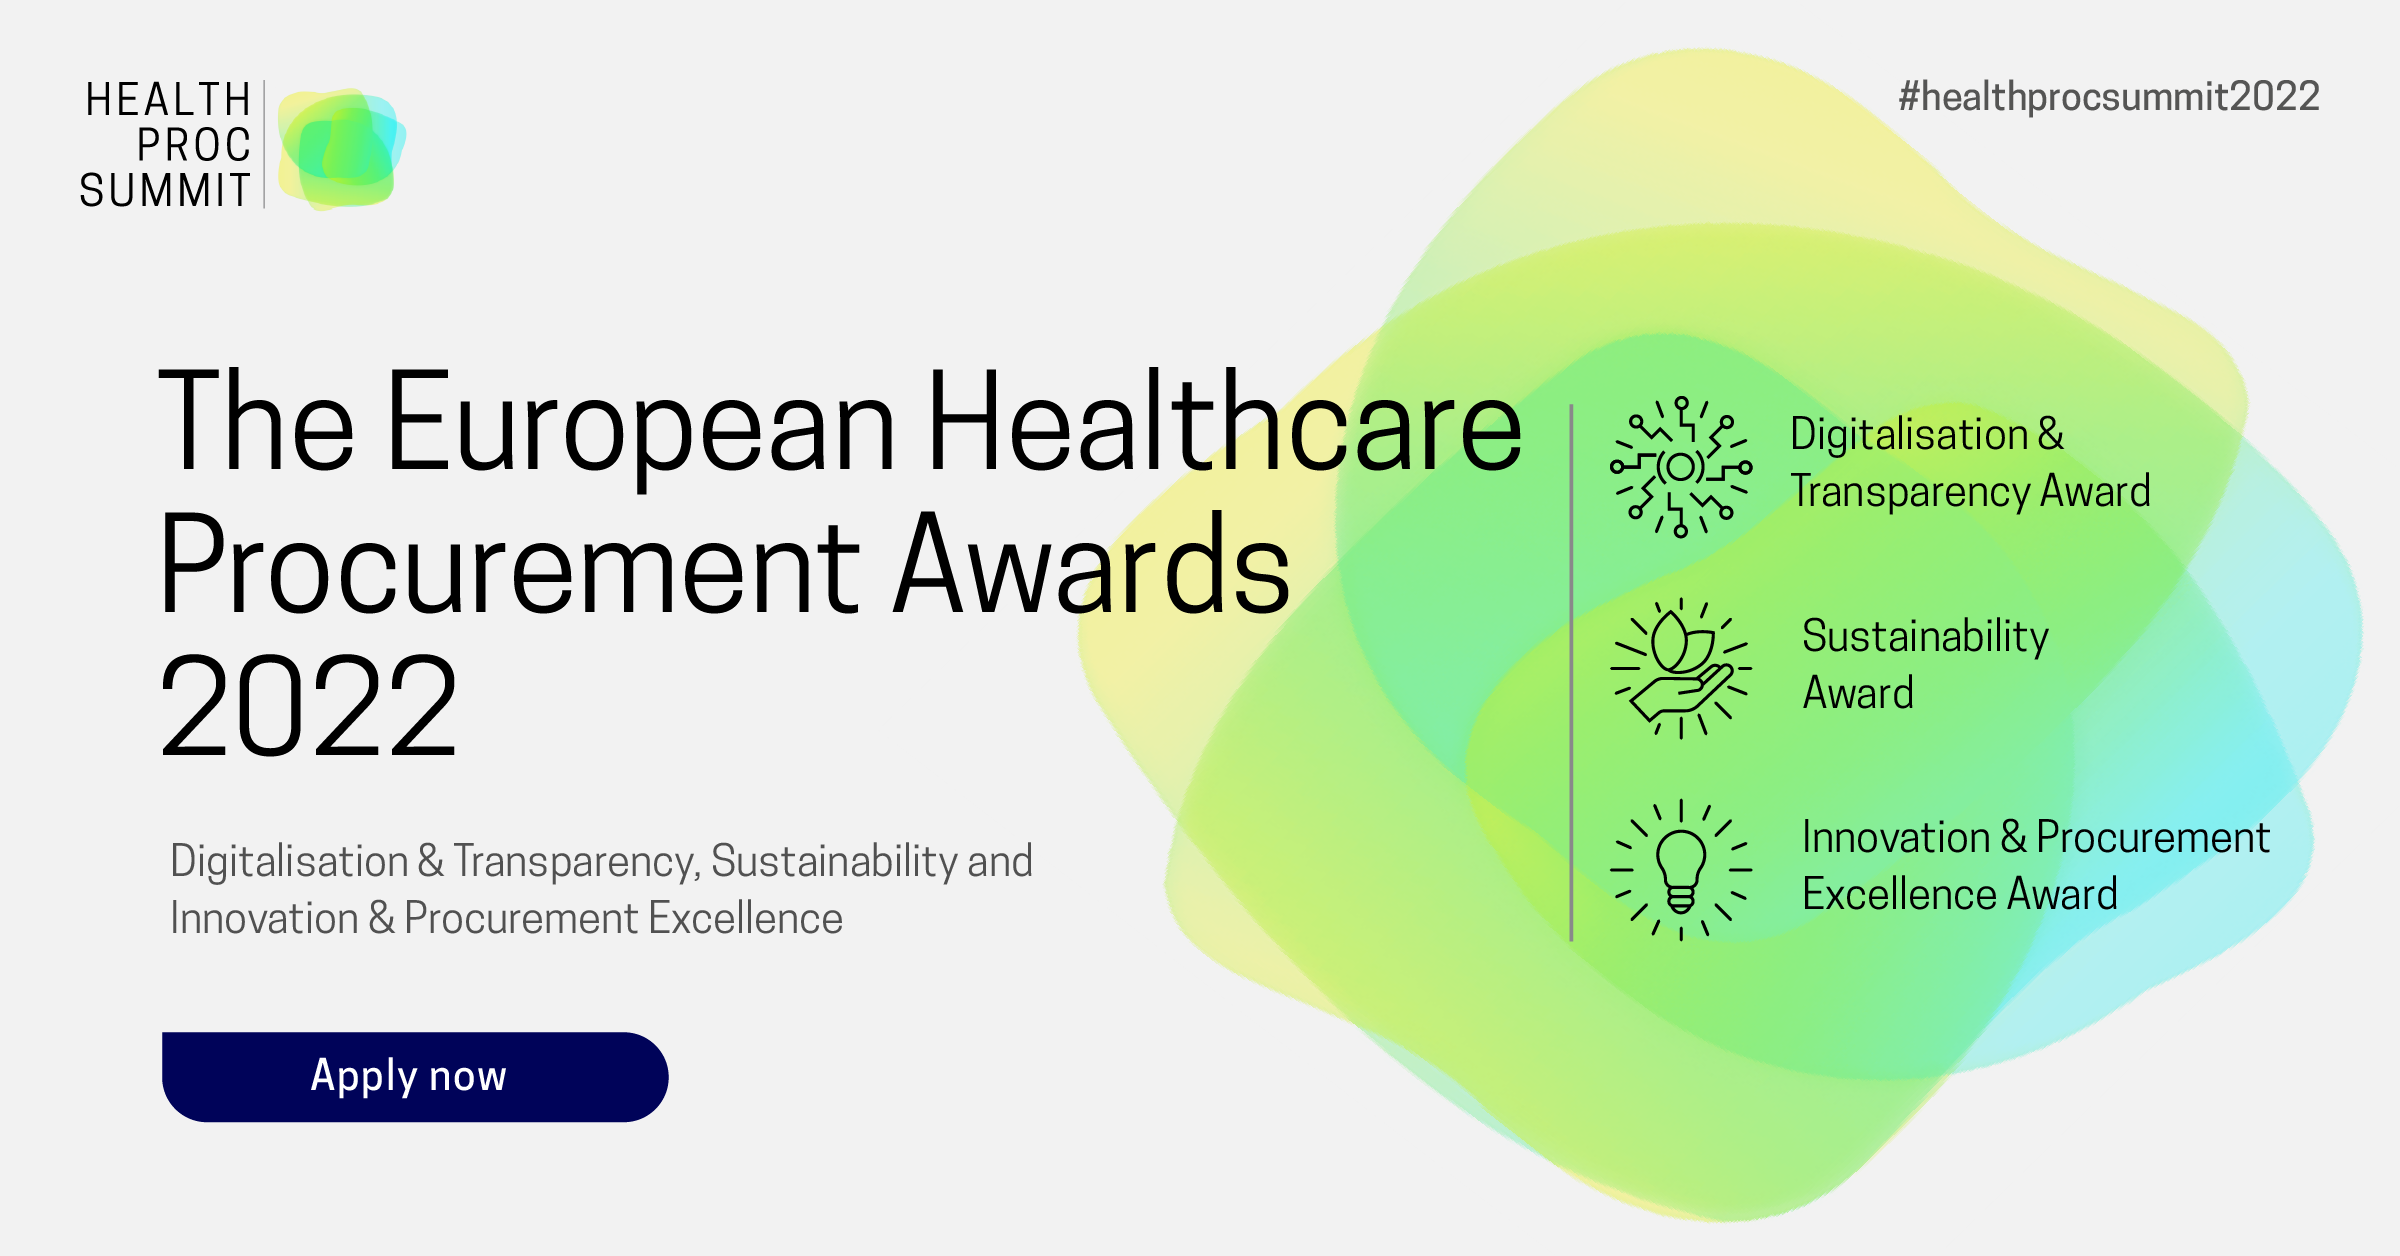 Submit your application for the European Healthcare Procurement Awards 2022 - #BHHMembersInitiatives